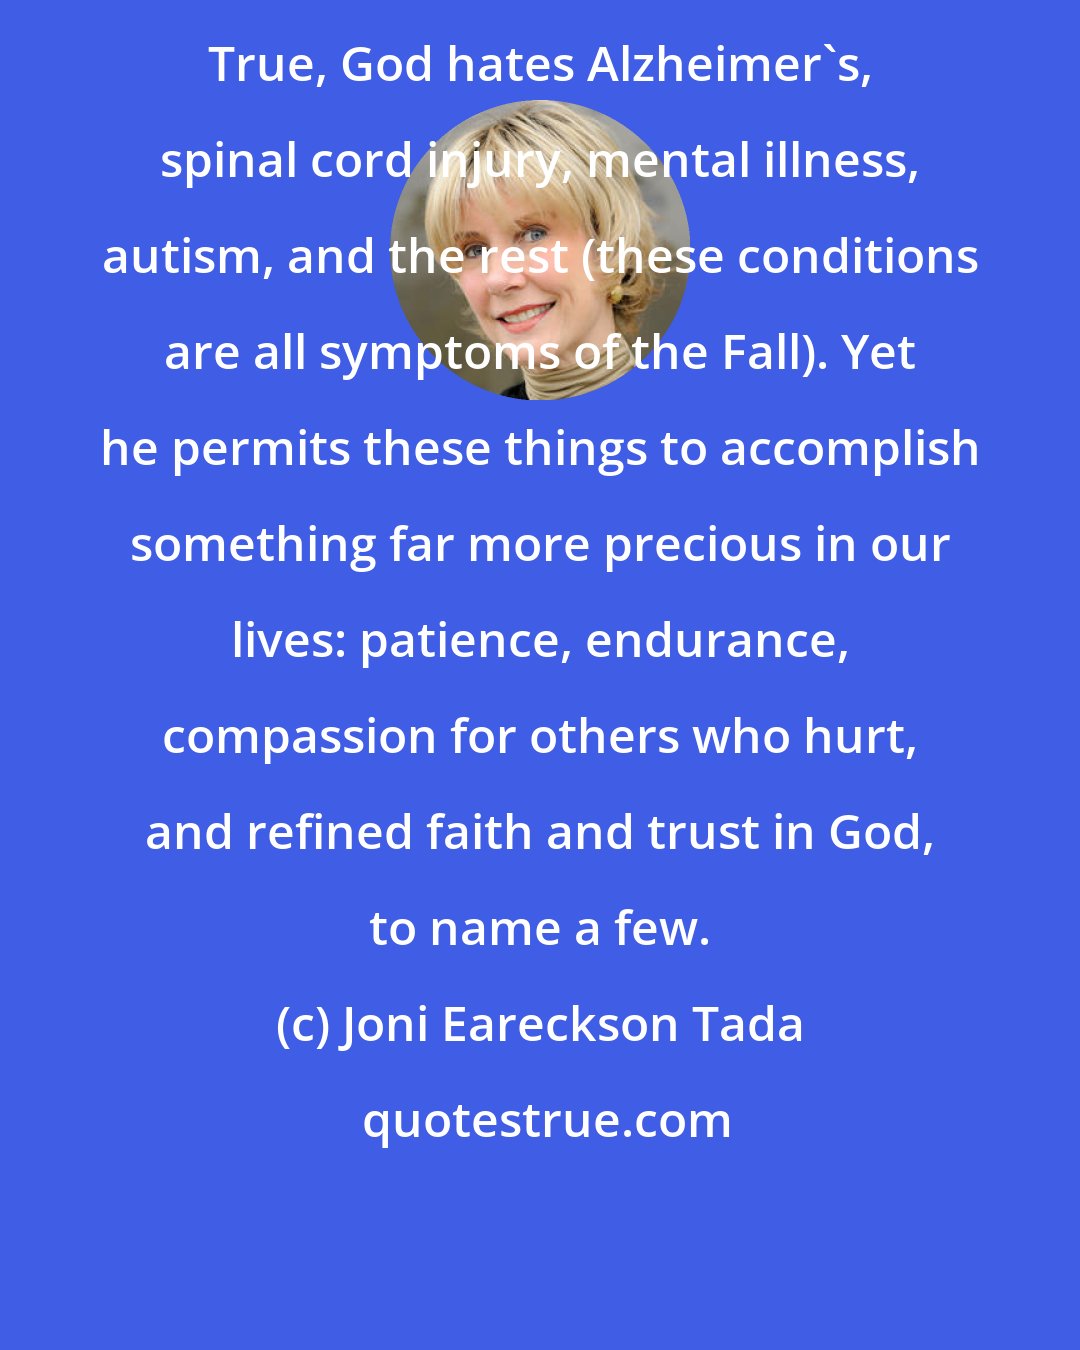 Joni Eareckson Tada: True, God hates Alzheimer's, spinal cord injury, mental illness, autism, and the rest (these conditions are all symptoms of the Fall). Yet he permits these things to accomplish something far more precious in our lives: patience, endurance, compassion for others who hurt, and refined faith and trust in God, to name a few.